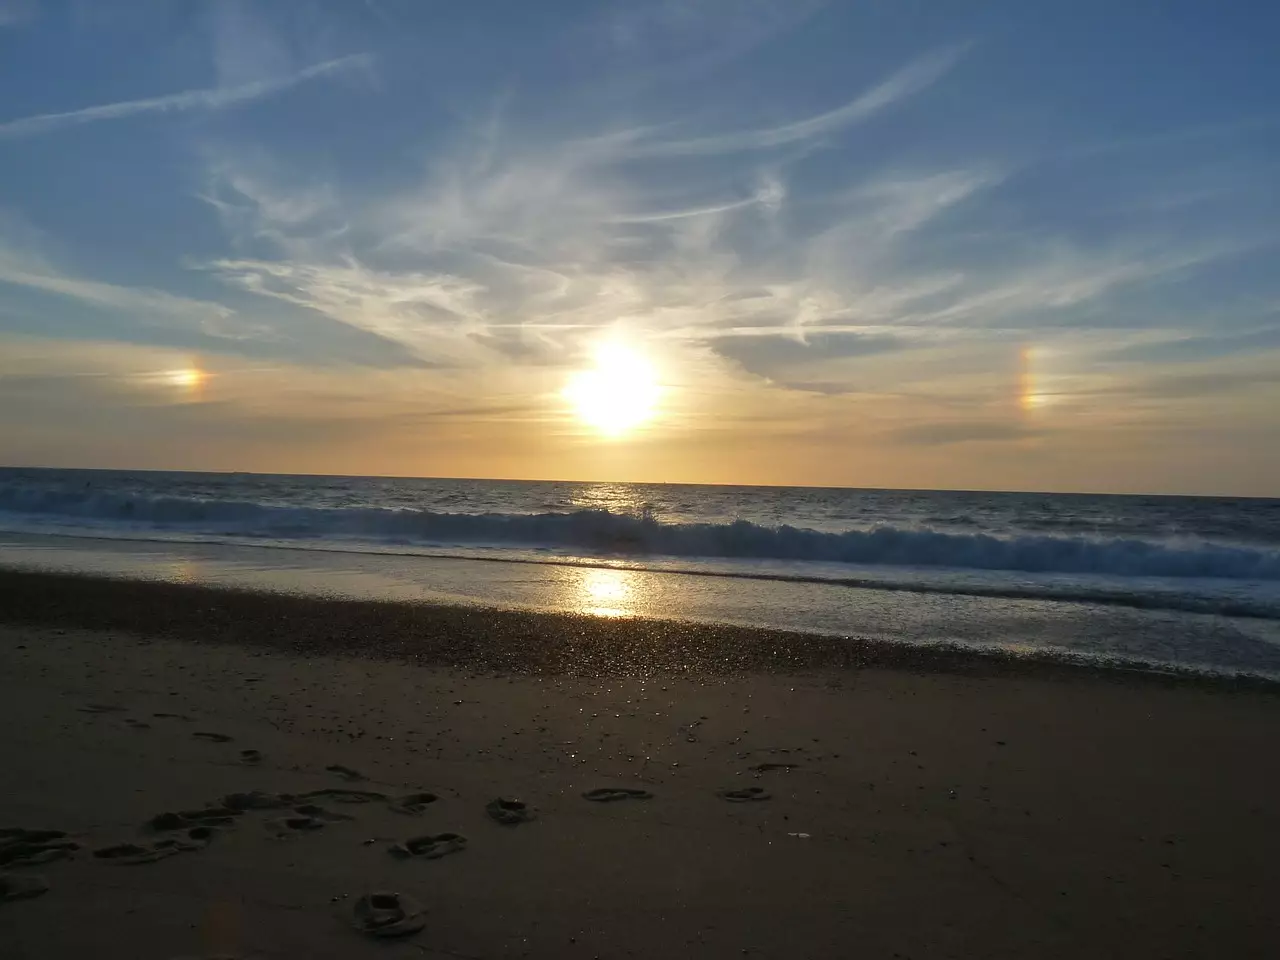 Sun dogs, or parhelia, are caused by refraction of sunlight by ice crystals in the atmosphere